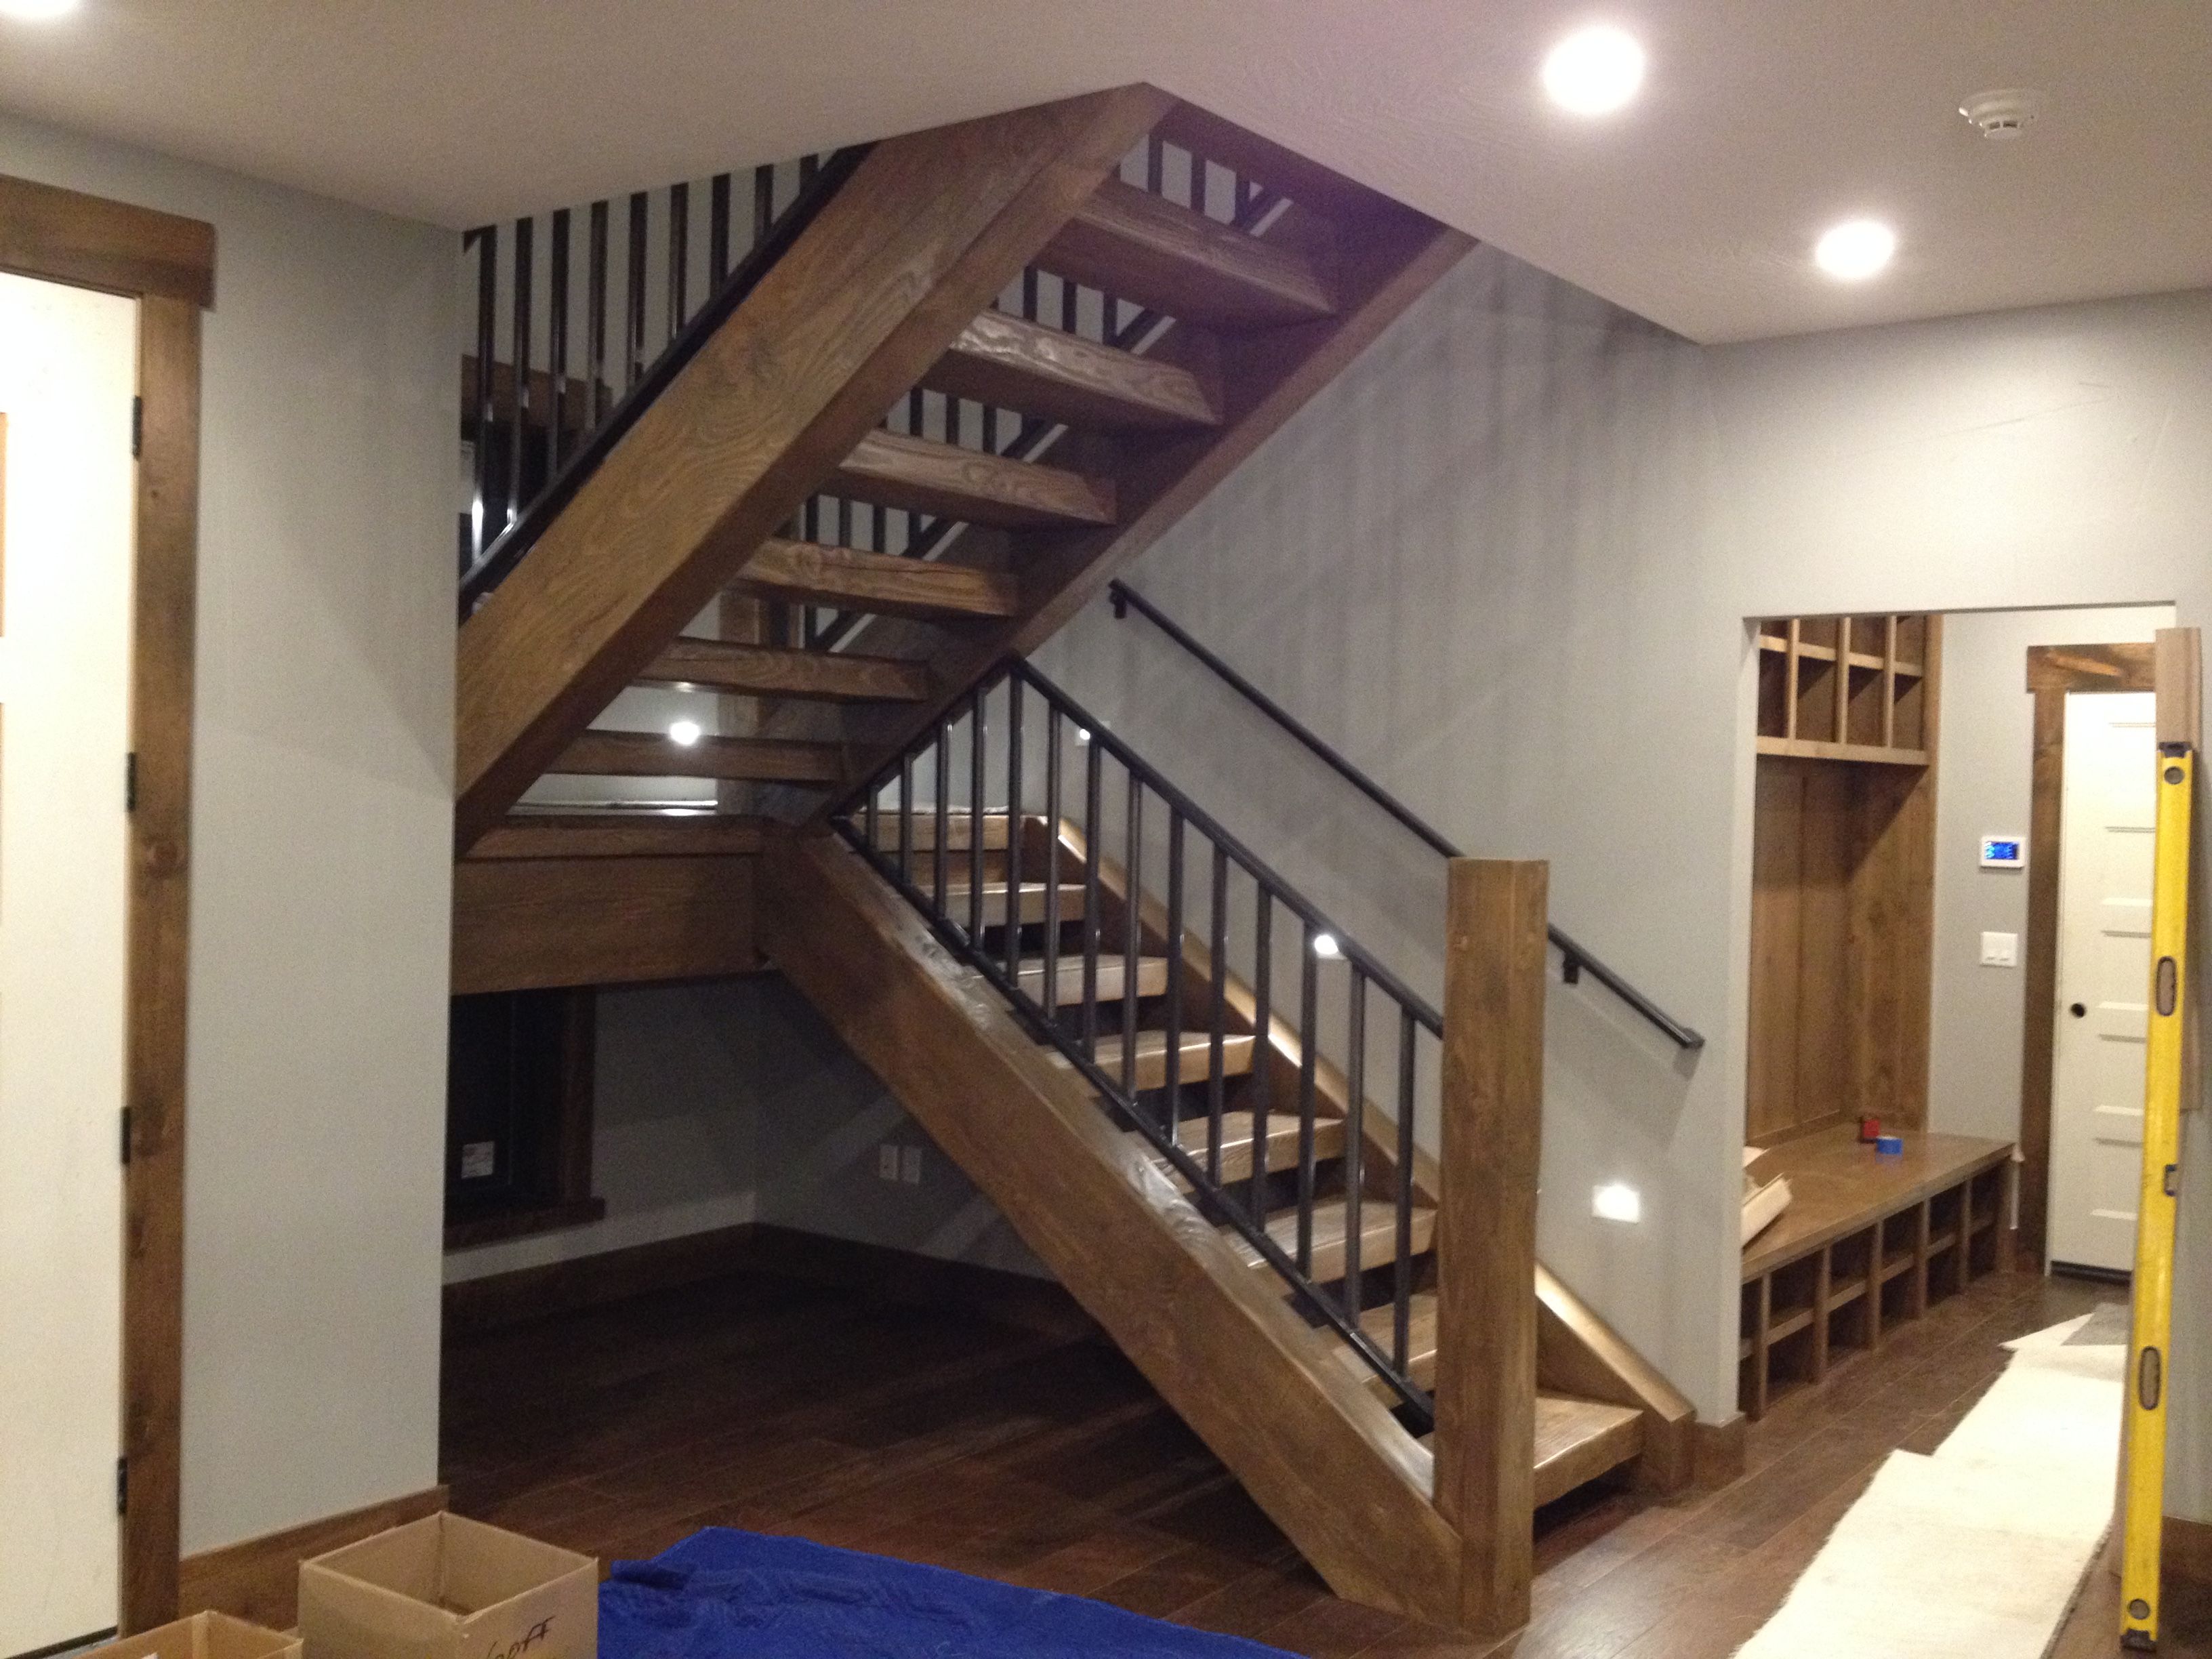 Stair Rail / Bannister - Made From Industrial Pipe! Steampunk